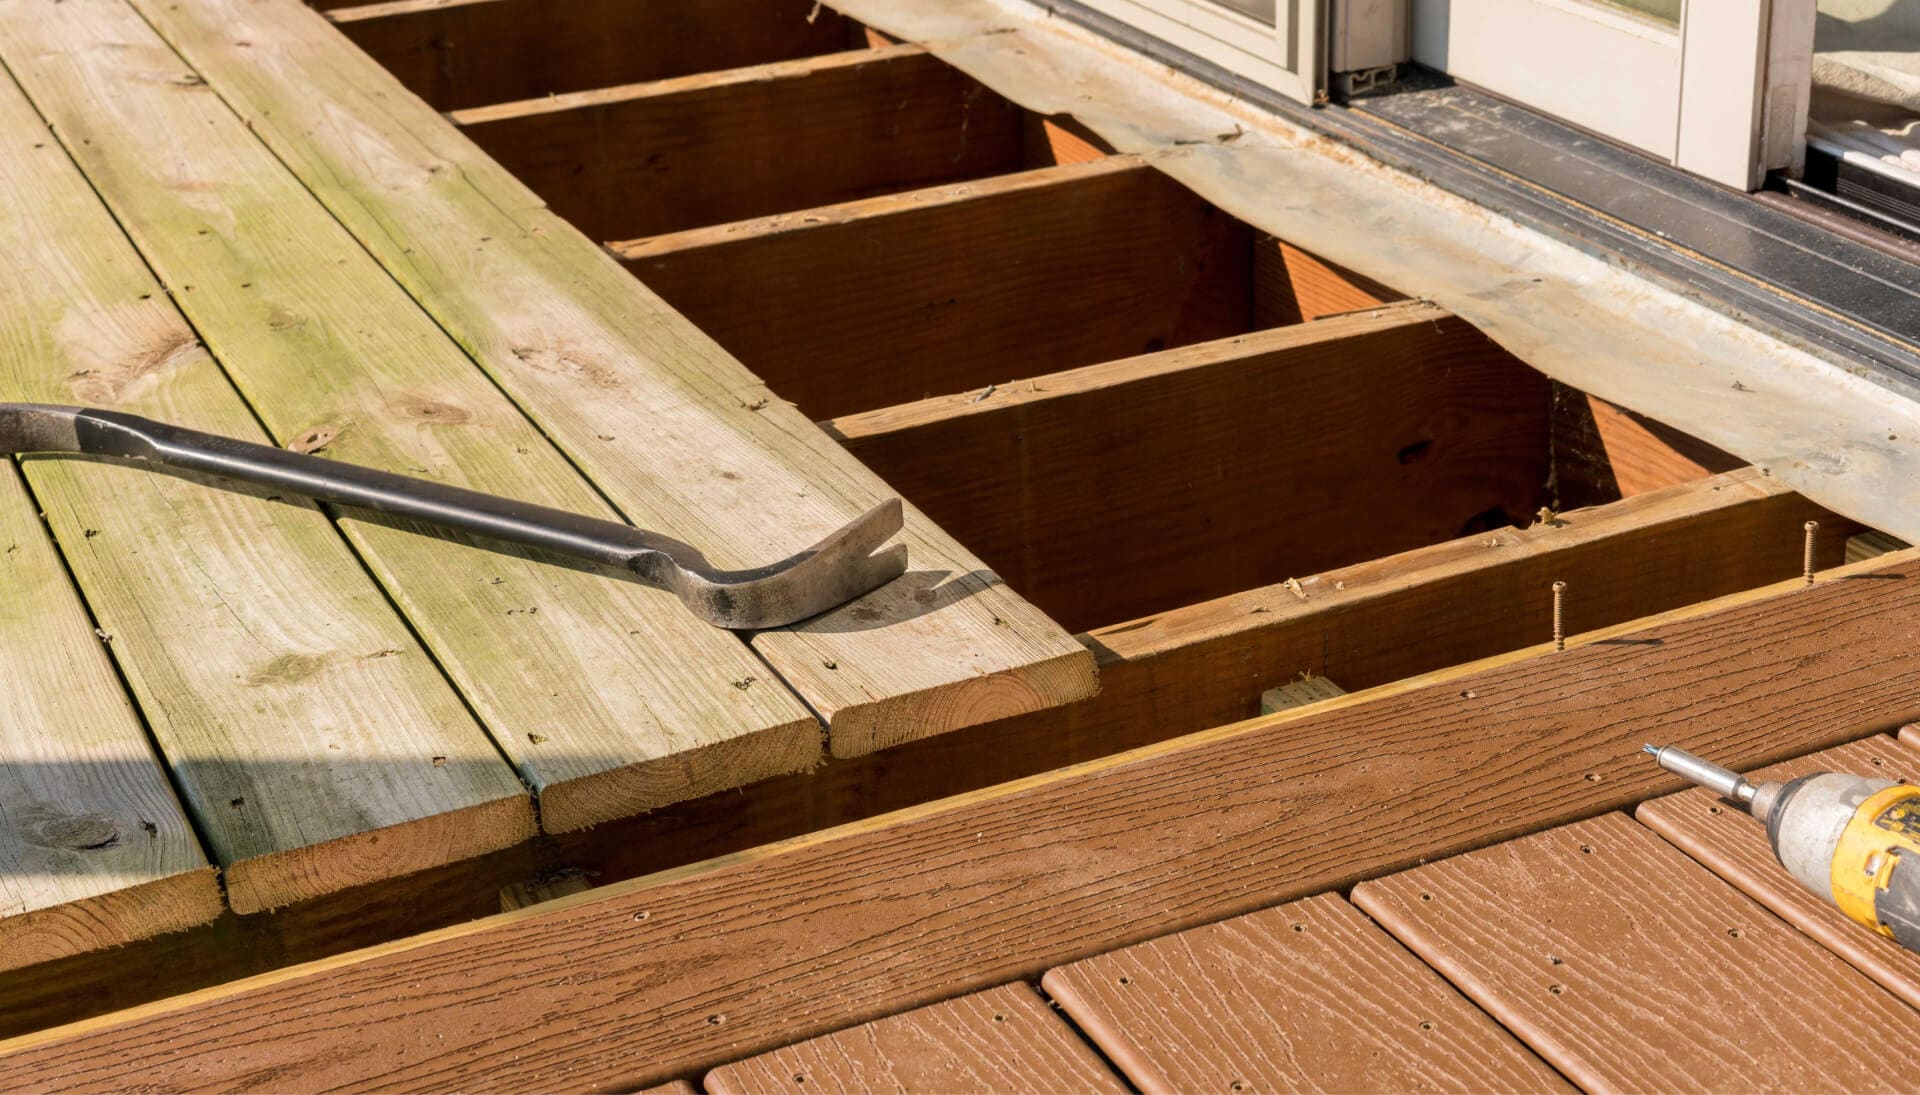 A professional deck repair service in Fort Collins, providing thorough inspections and maintenance to ensure the safety and durability of the structure